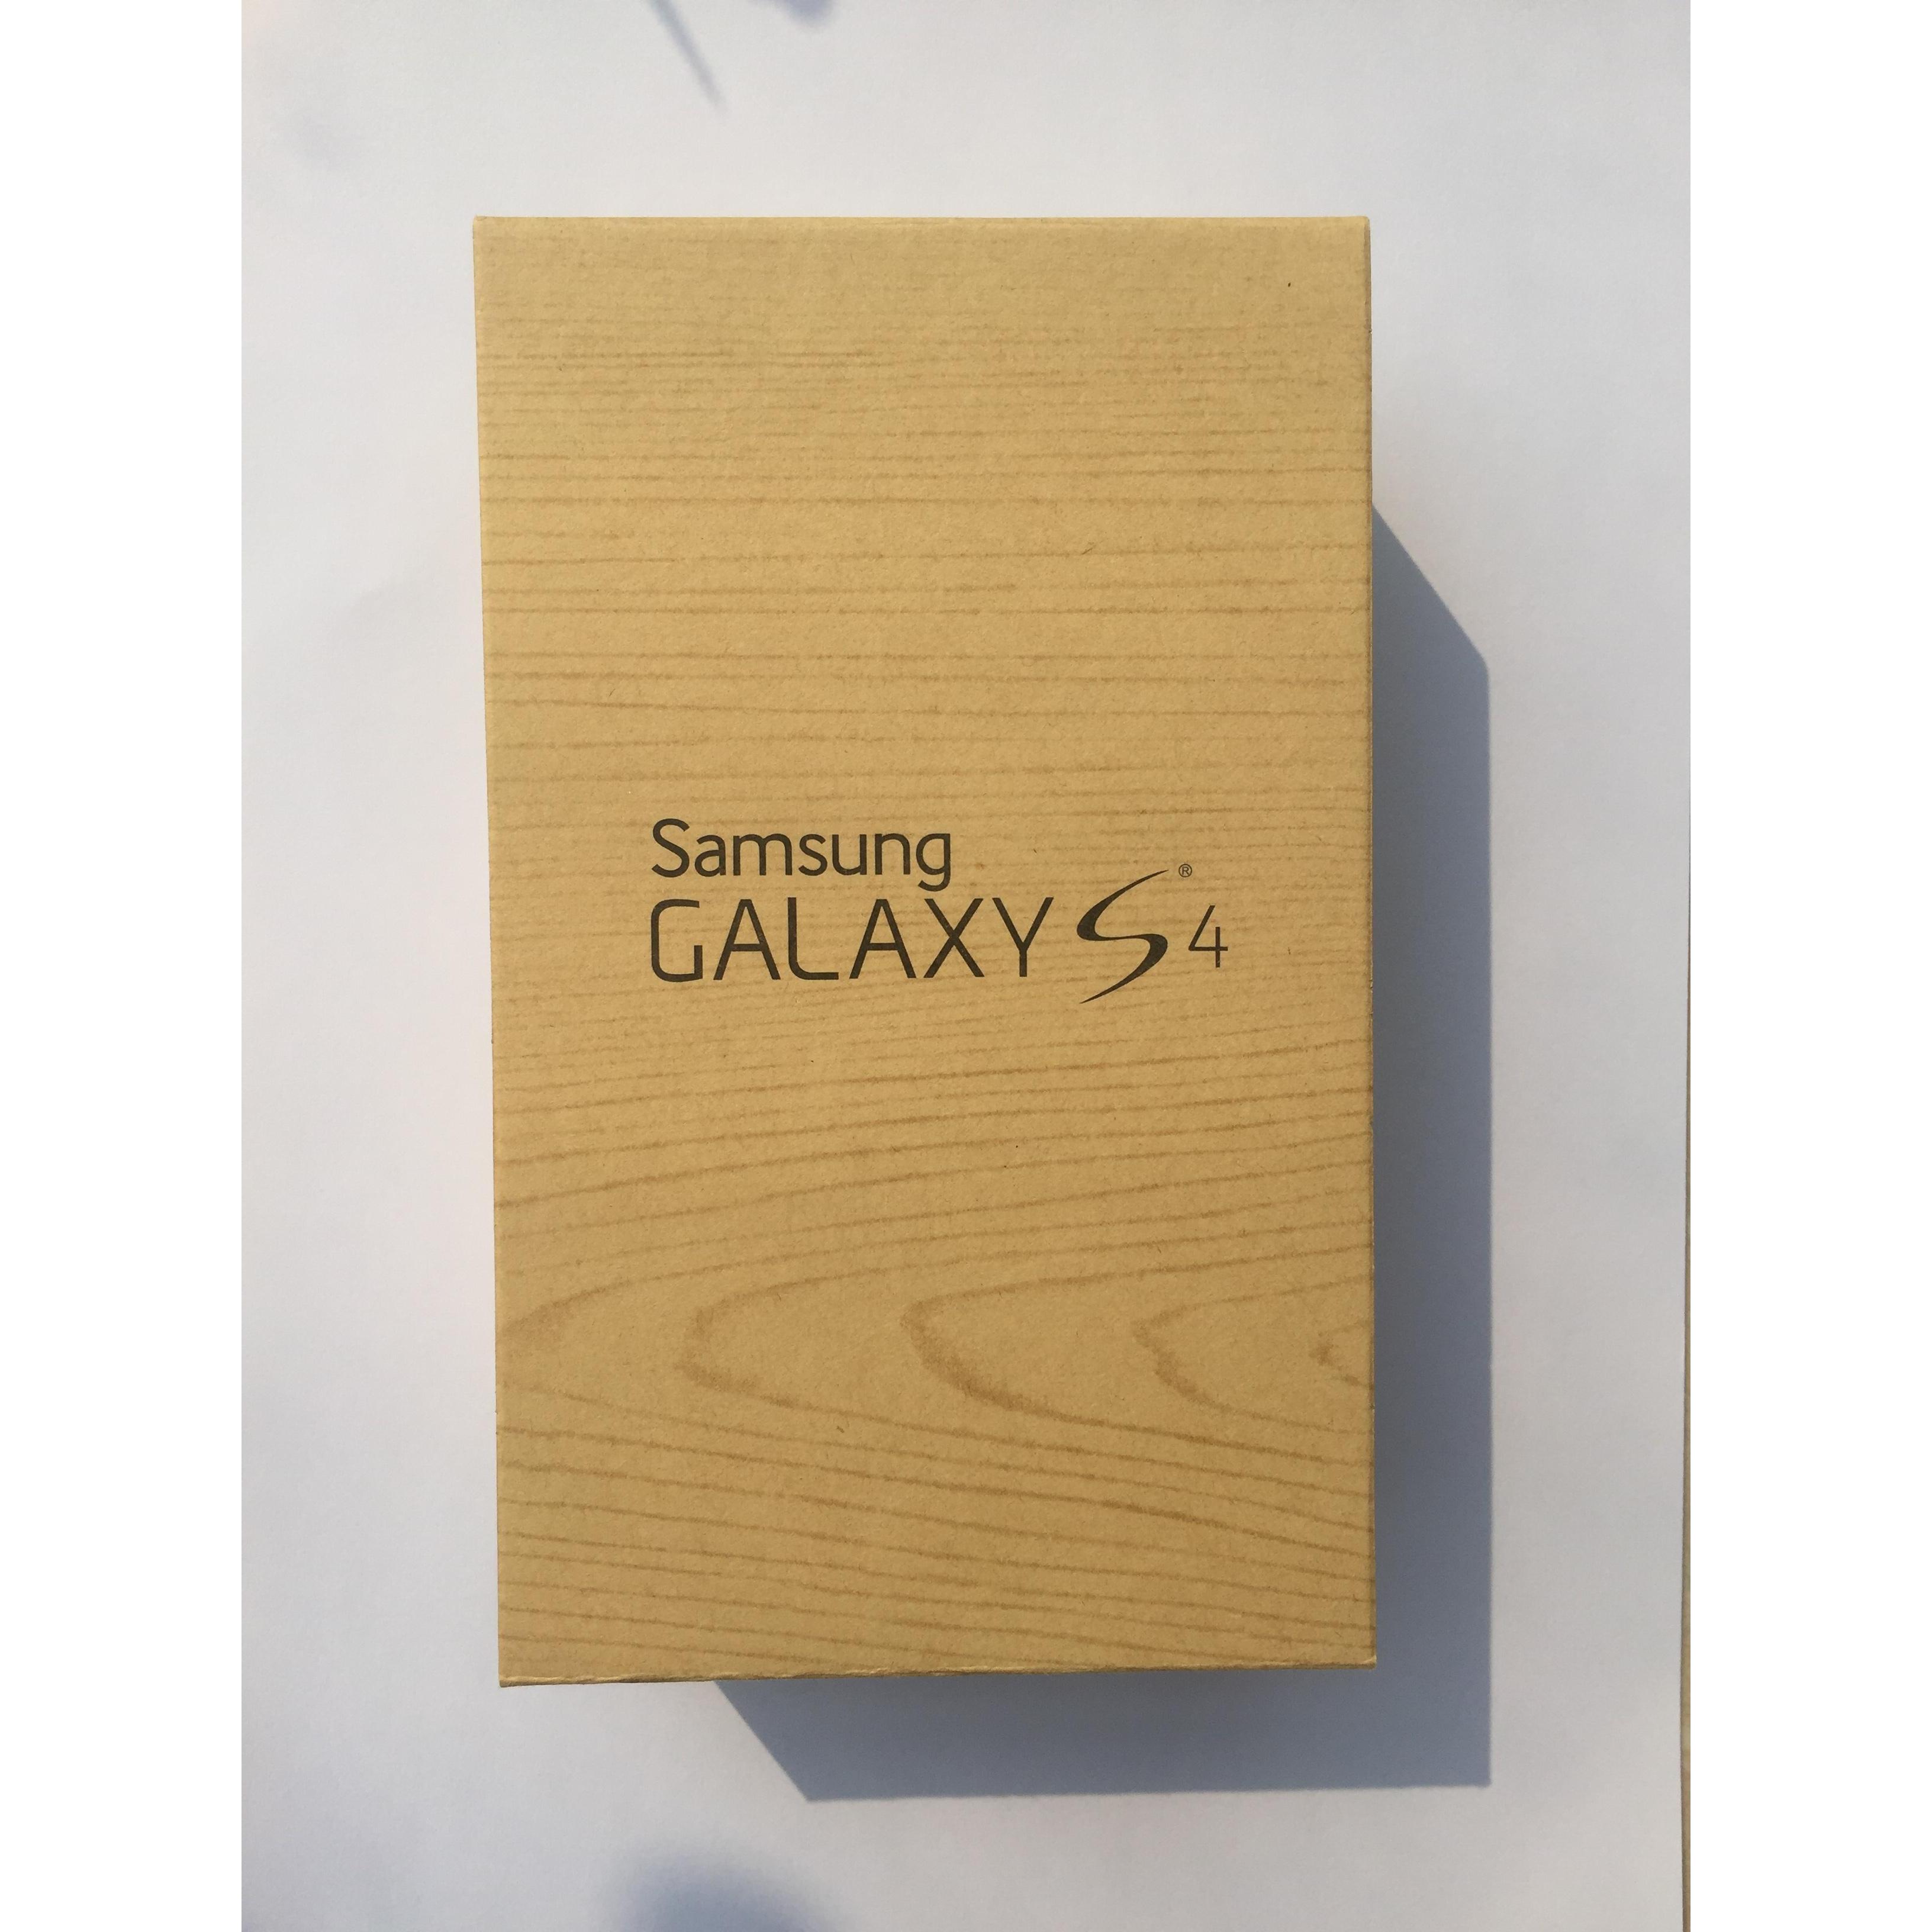 Samsung Samsung Galaxy S4 at&t Wholesale Suppliers